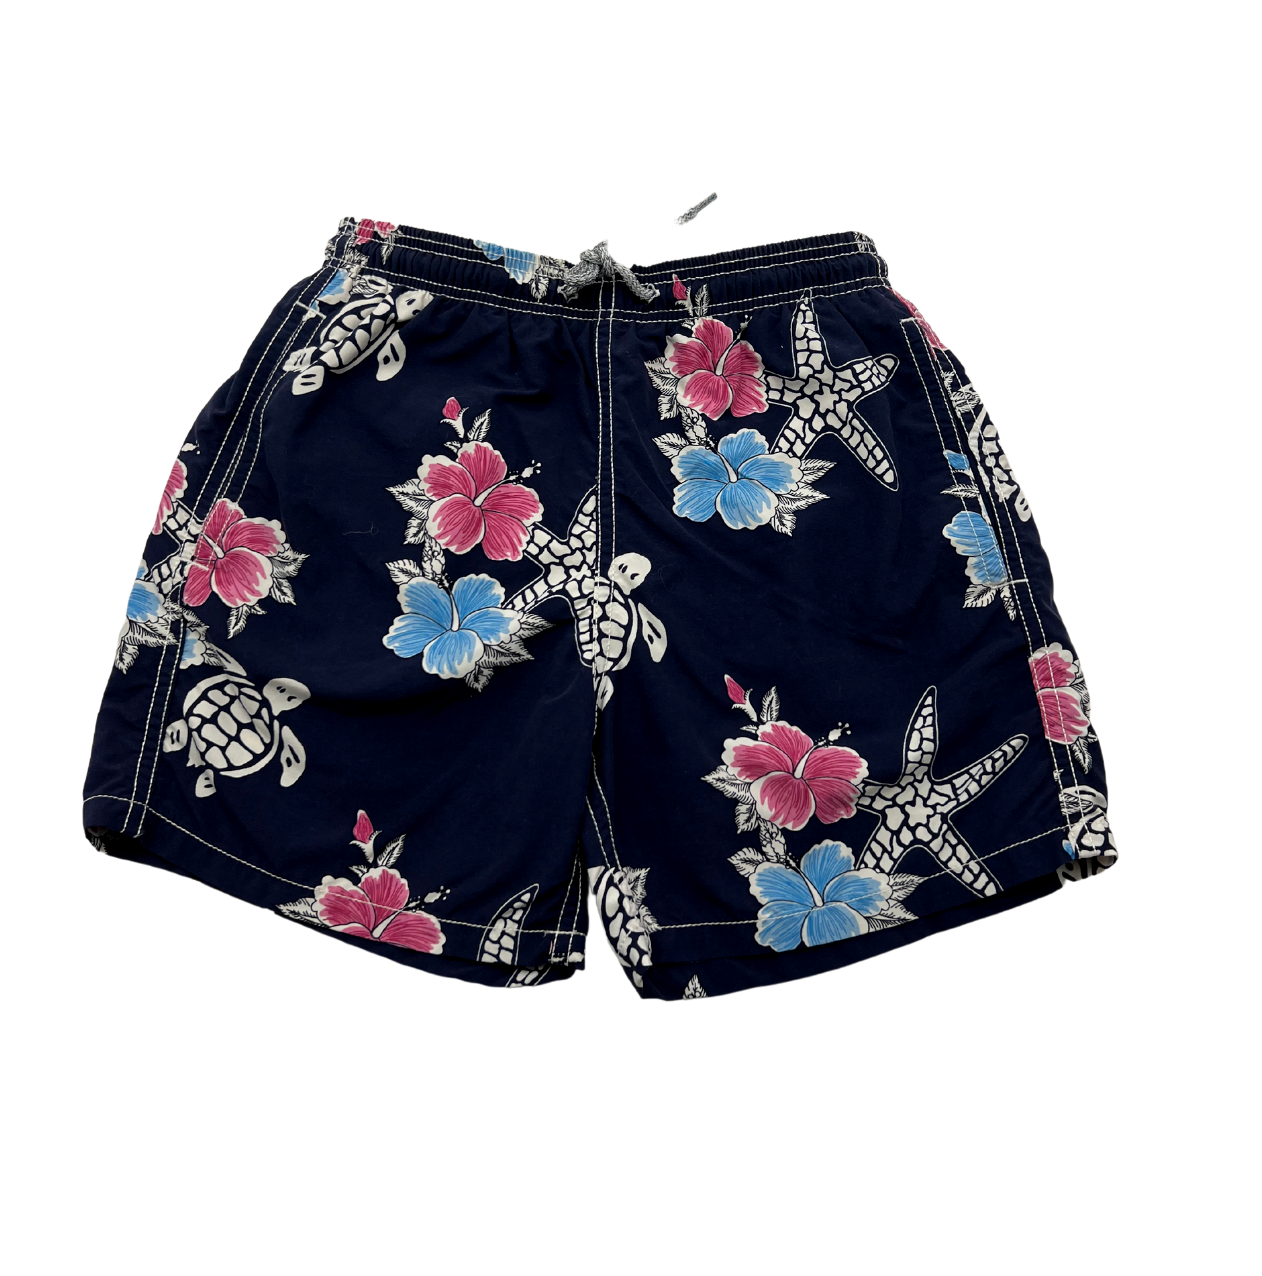 VILEBREQUIN - Flower &amp; turtle swimsuit - 10 years old